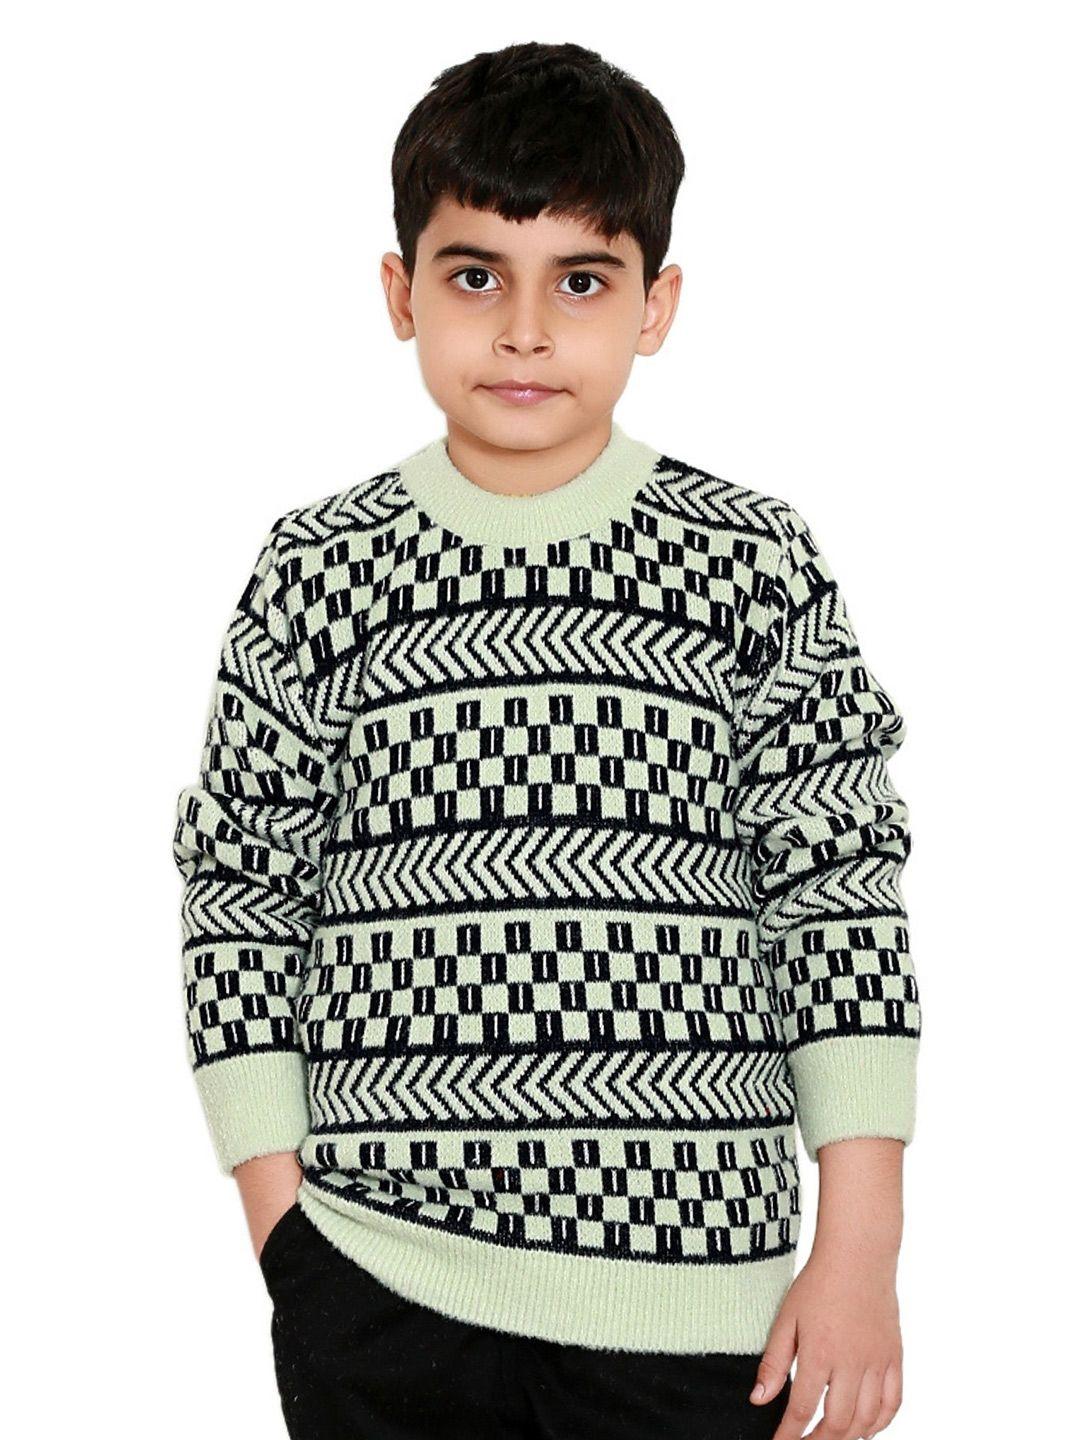 baesd-boys-geometric-printed-round-neck-long-sleeves-pullover-sweater